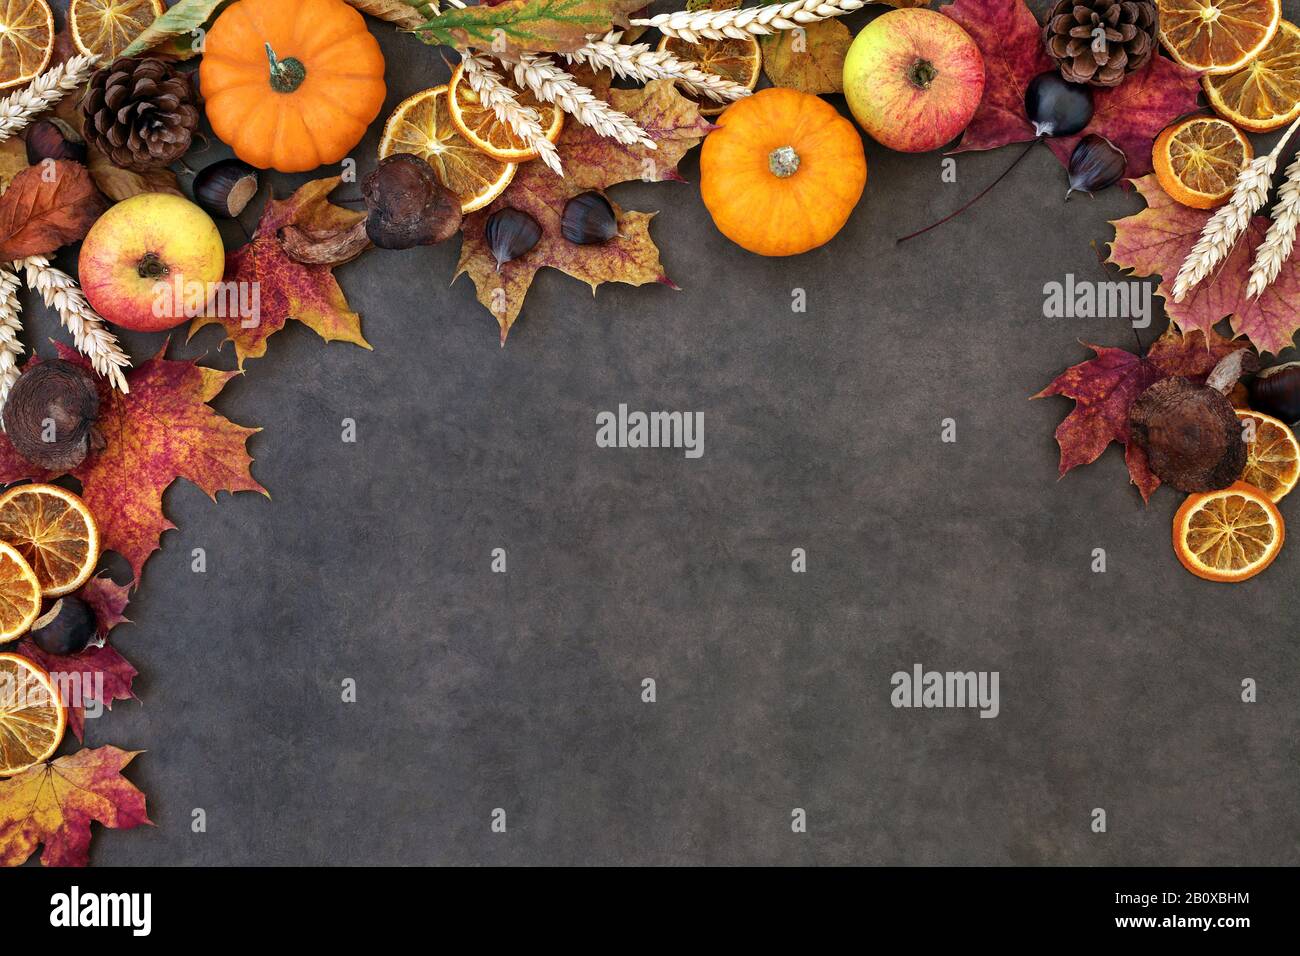 Autumn nature background border with food, flora and fauna on lokta paper background. Top view. Harvest festival theme. Stock Photo